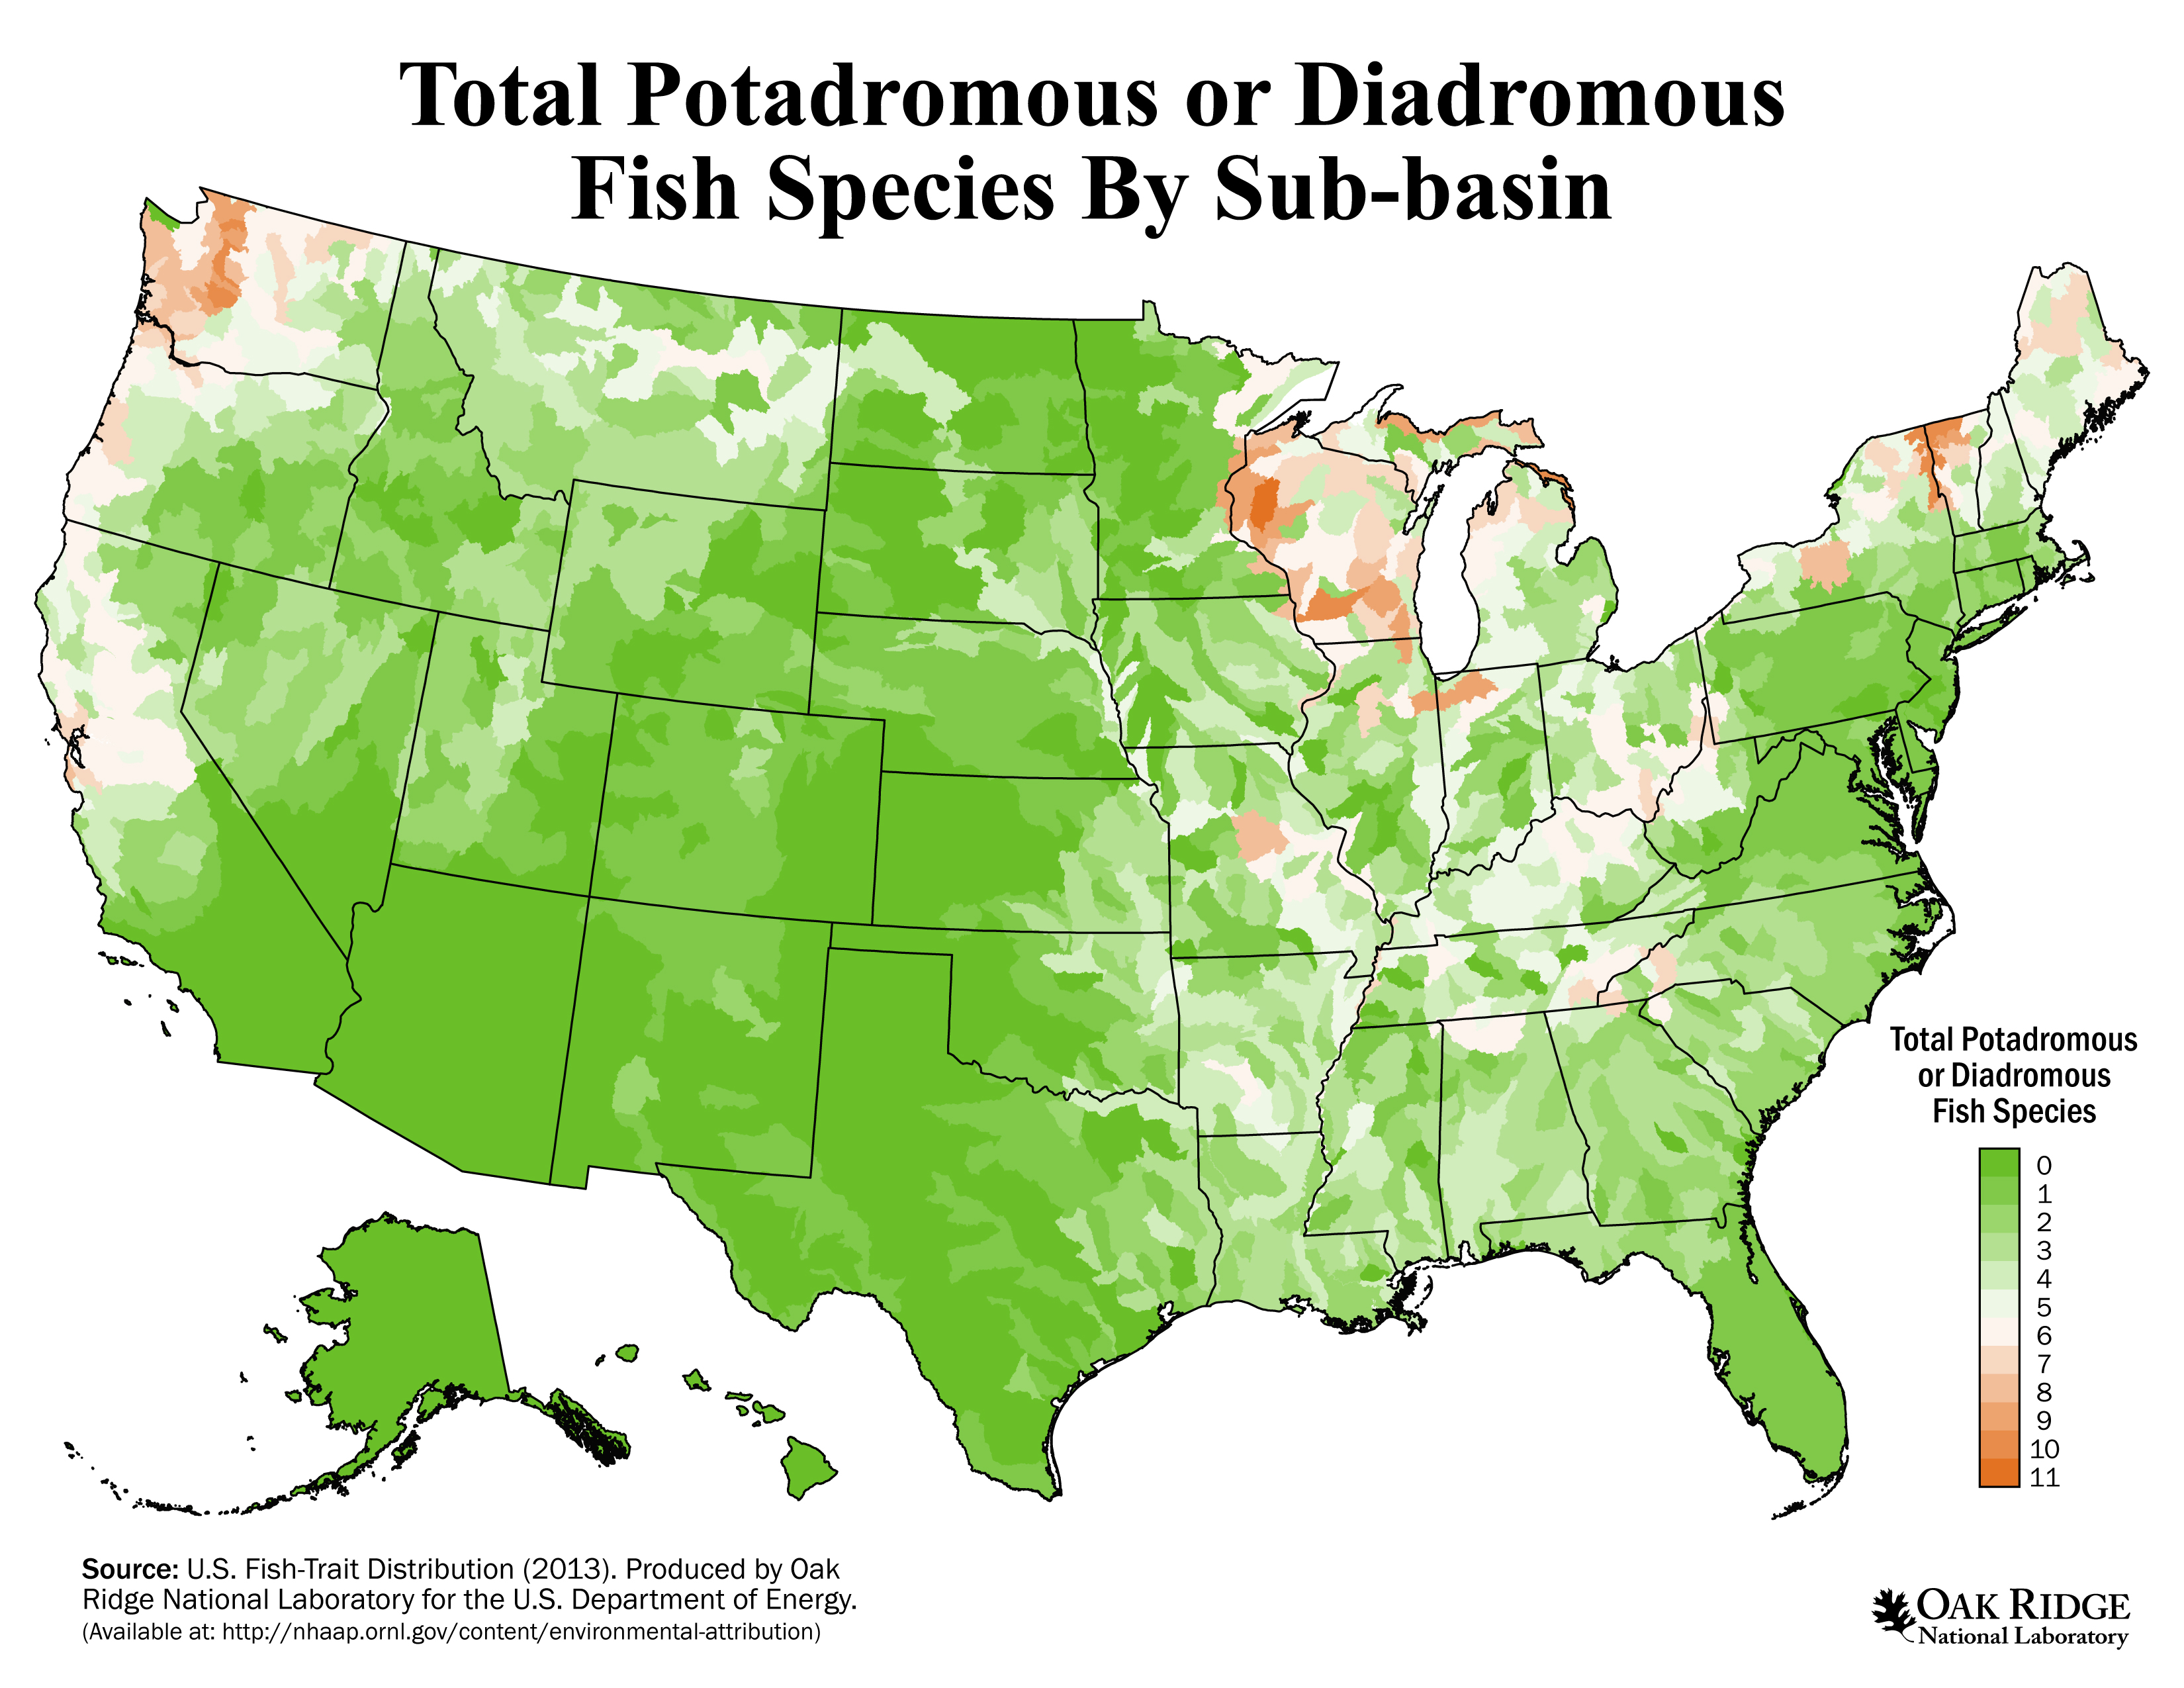 Total Potadromous or Diadromous Fish Species by Sub-basin in the United  States, 2013